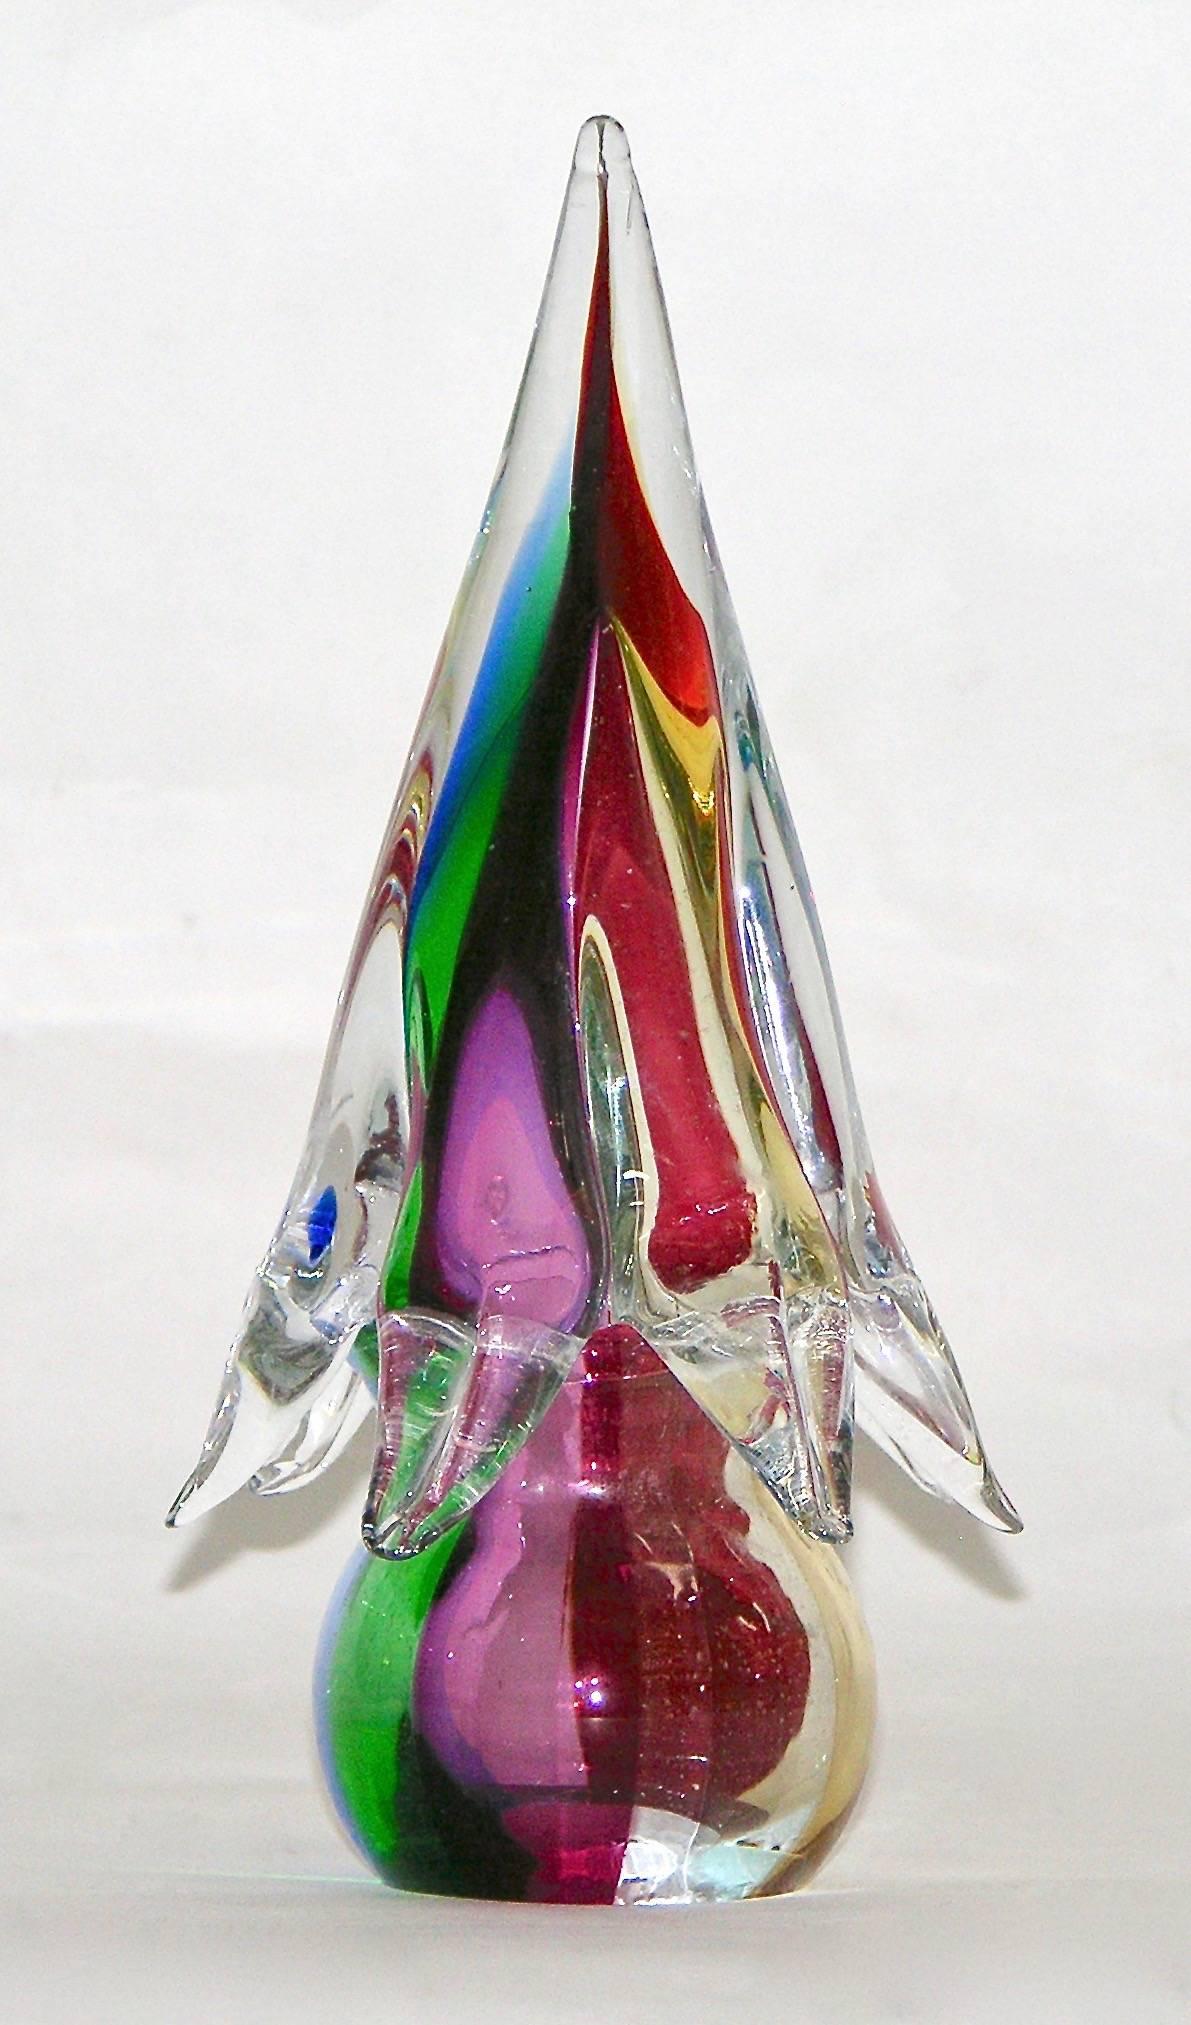 Colorful Venetian glass tree of minimalist shape, blown and handcrafted in overlaid clear Murano glass worked with incalmo, the different colors, red, green, blue, yellow, one next to the other in a joyful pattern make them glow like Christmas tree.